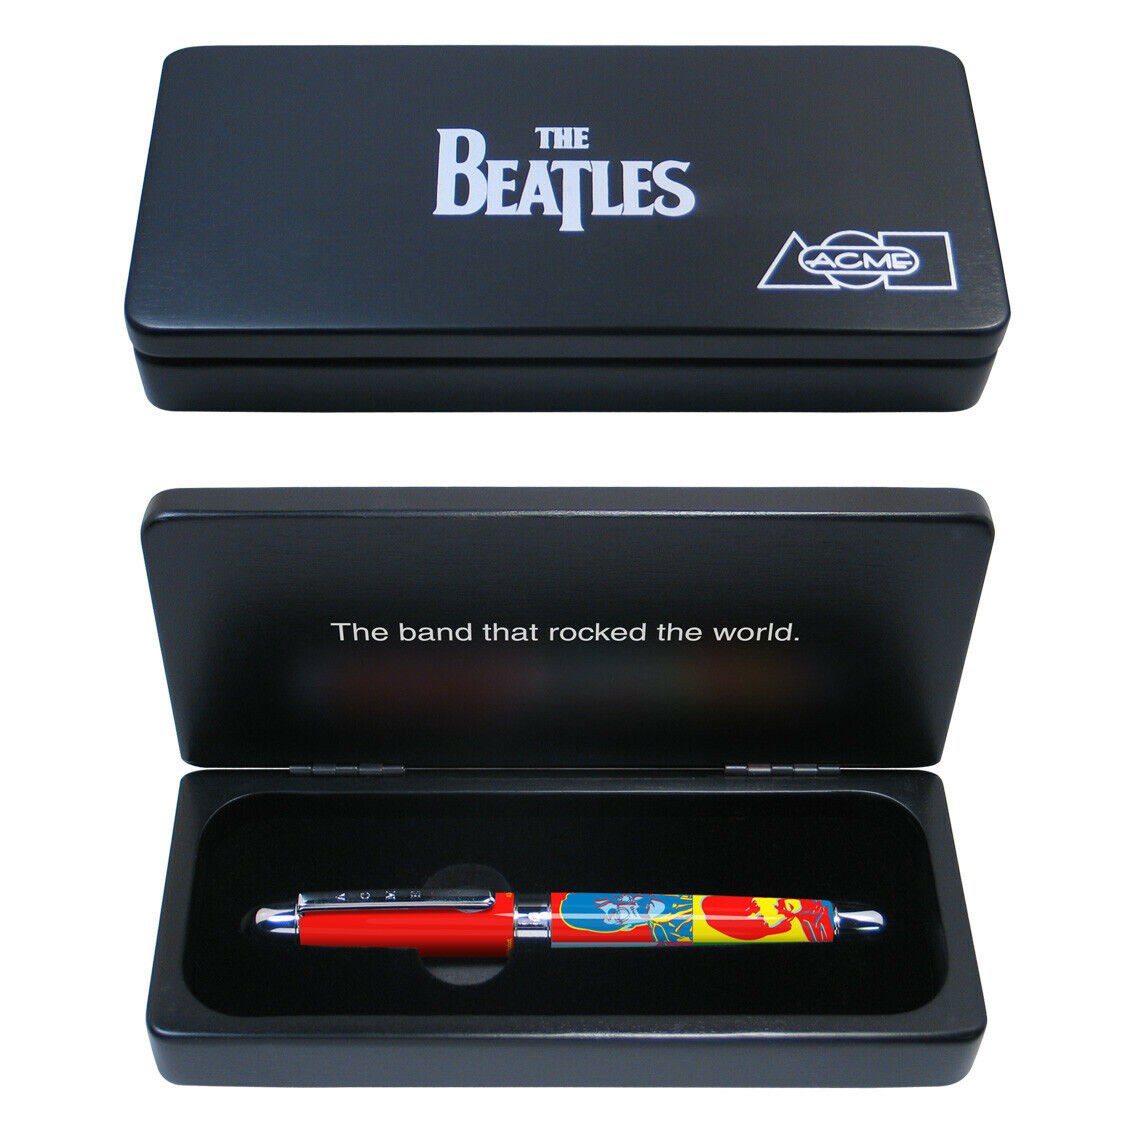 ACME THE BEATLES "1967" LIMITED EDITION Roller Ball Pen NEW  #74/1967